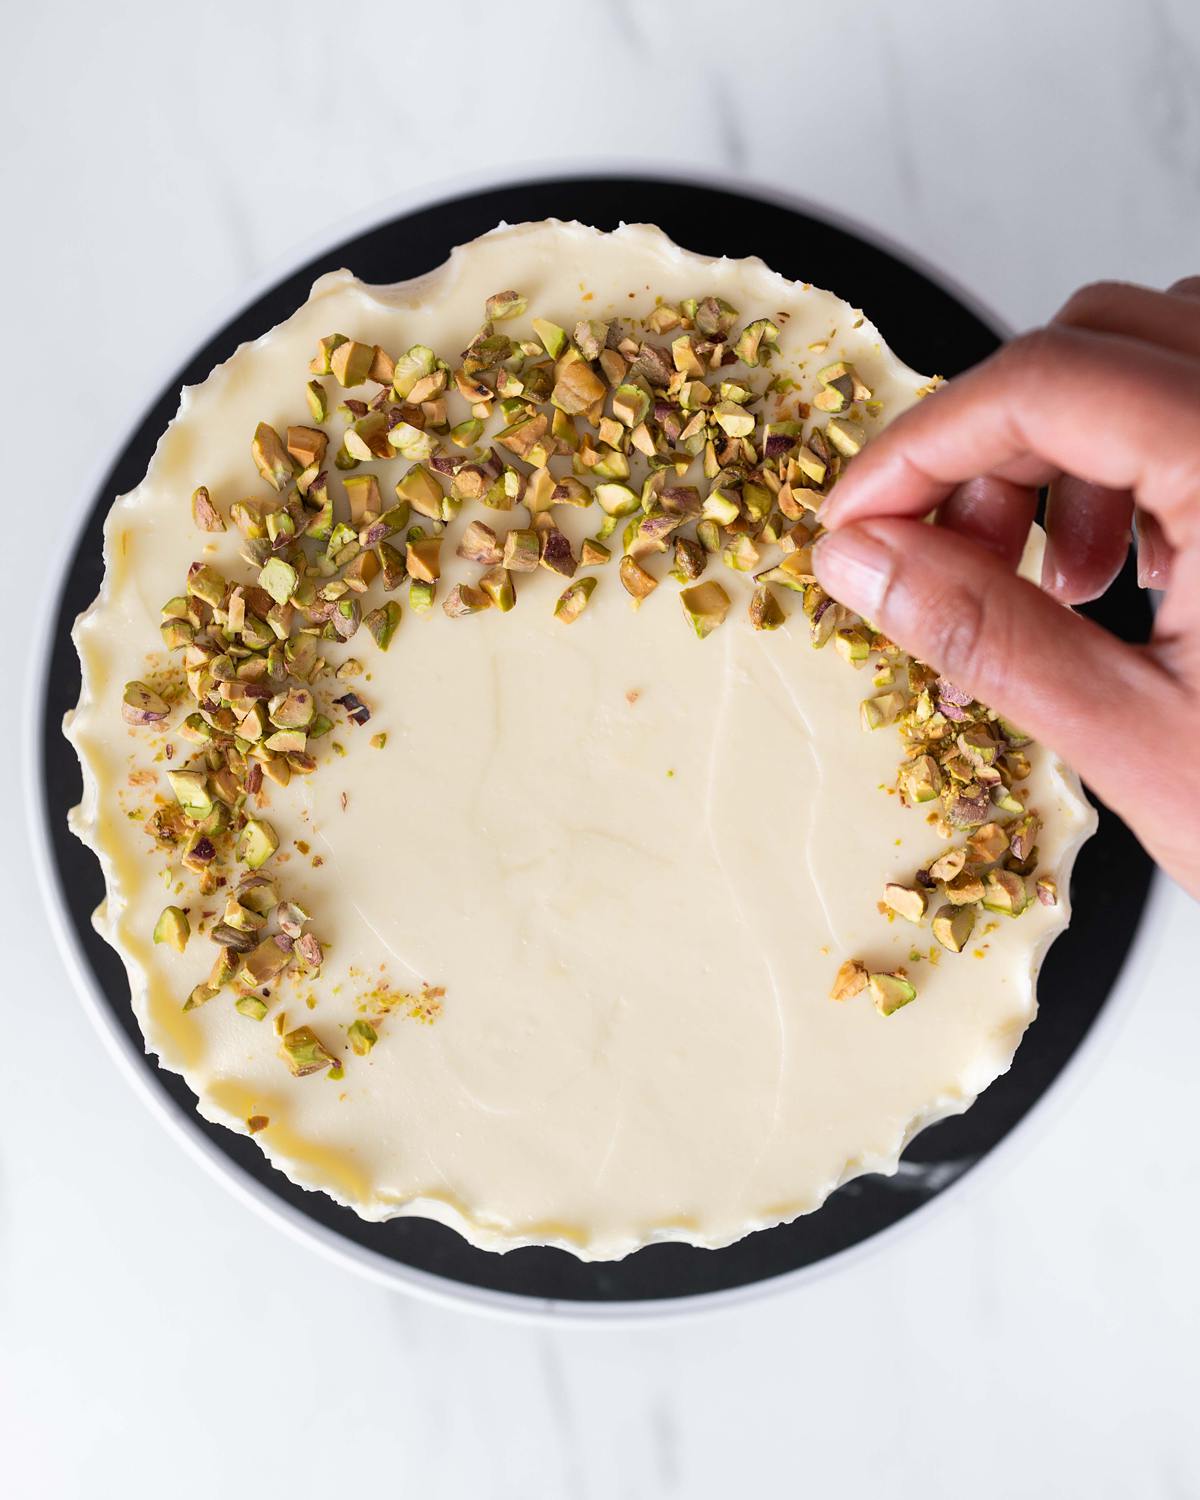 Sprinkling pistachios to decorate the top of the cake....